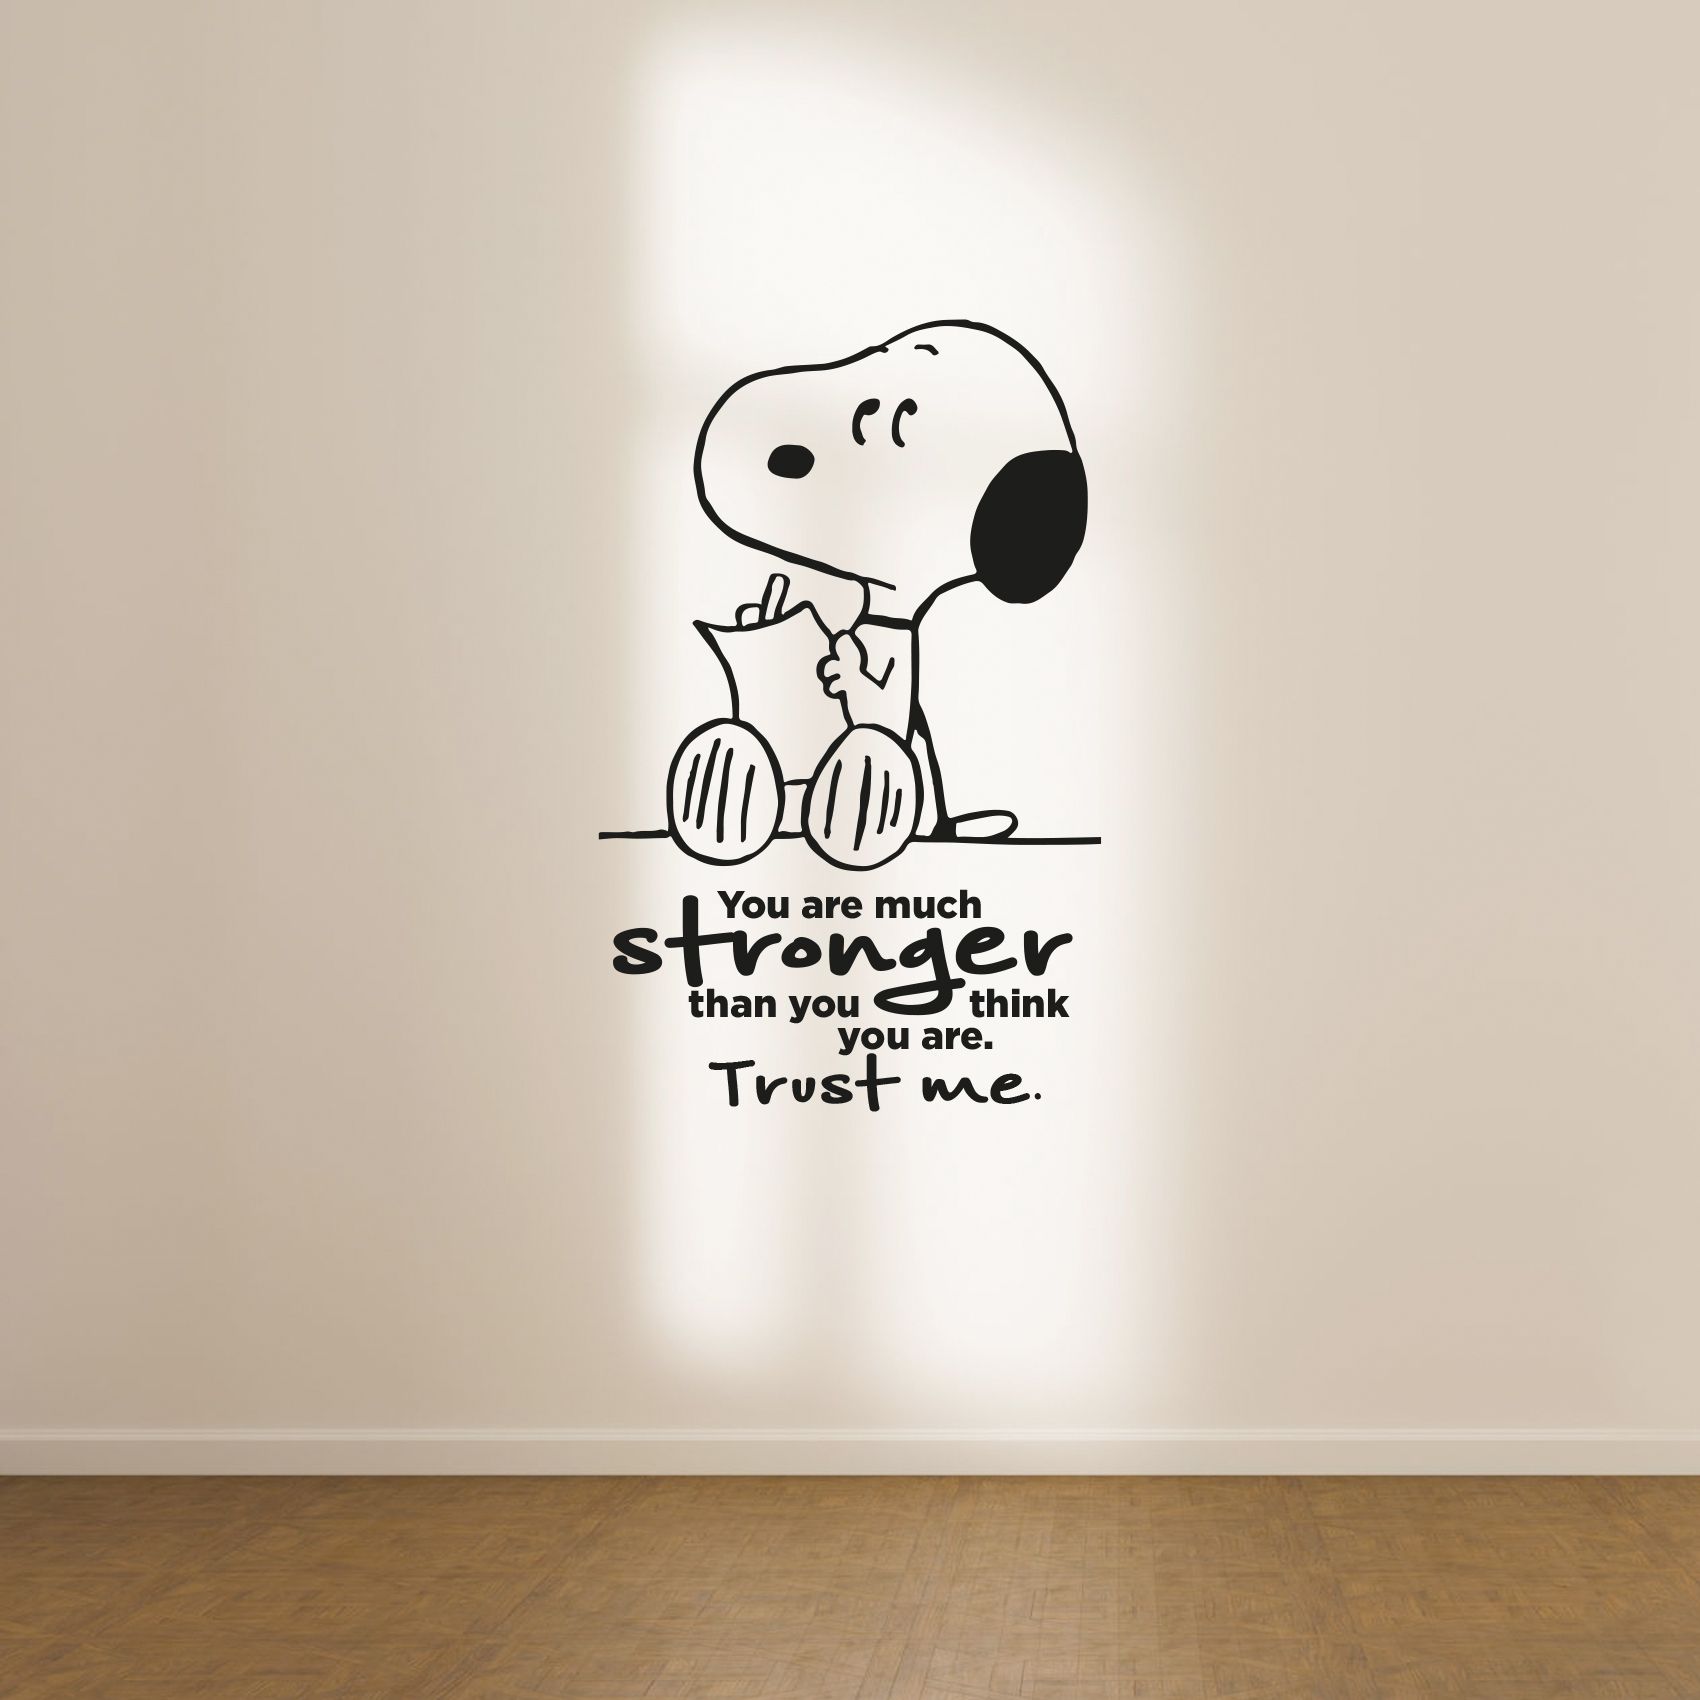 Snoopy Camping Quotes Vinyl Home Wall Decal Best Memories Are Made Outdoors